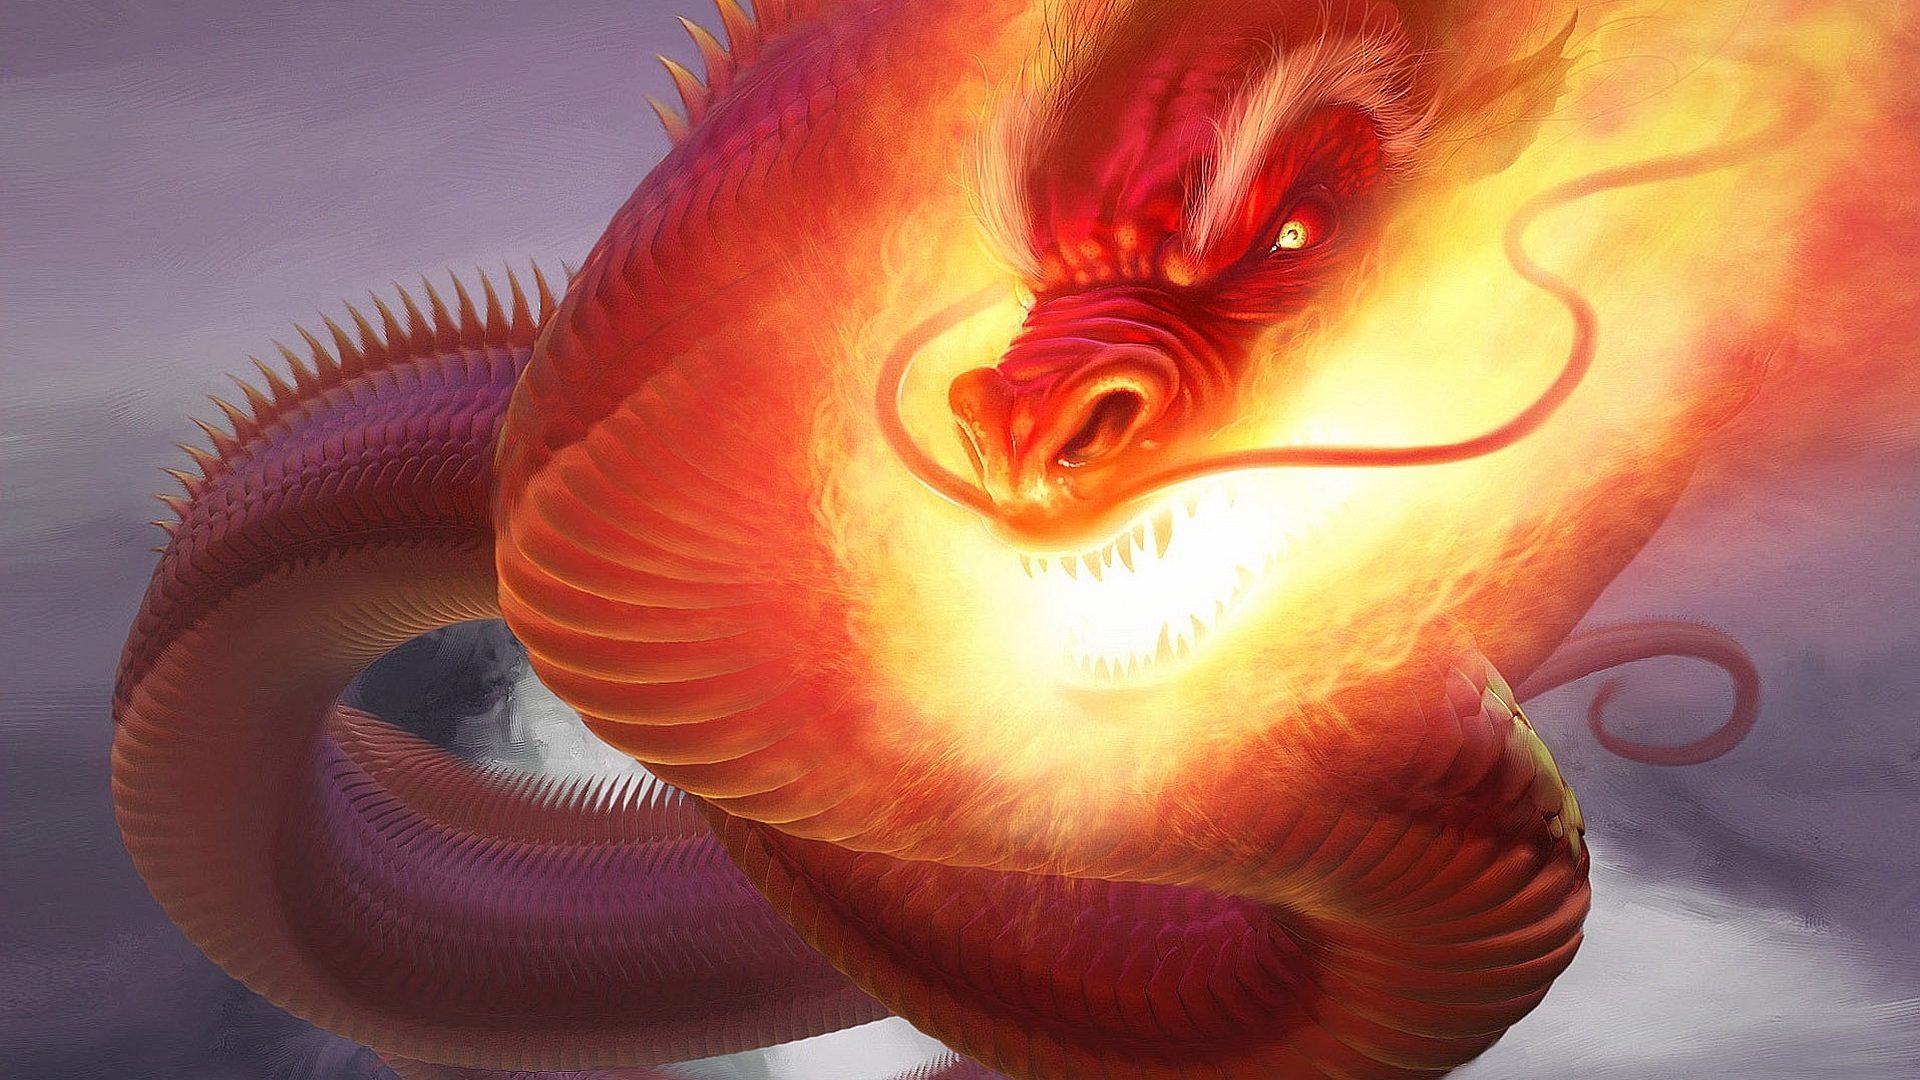 Chinese Dragon Breathing Fire - HD Wallpaper 